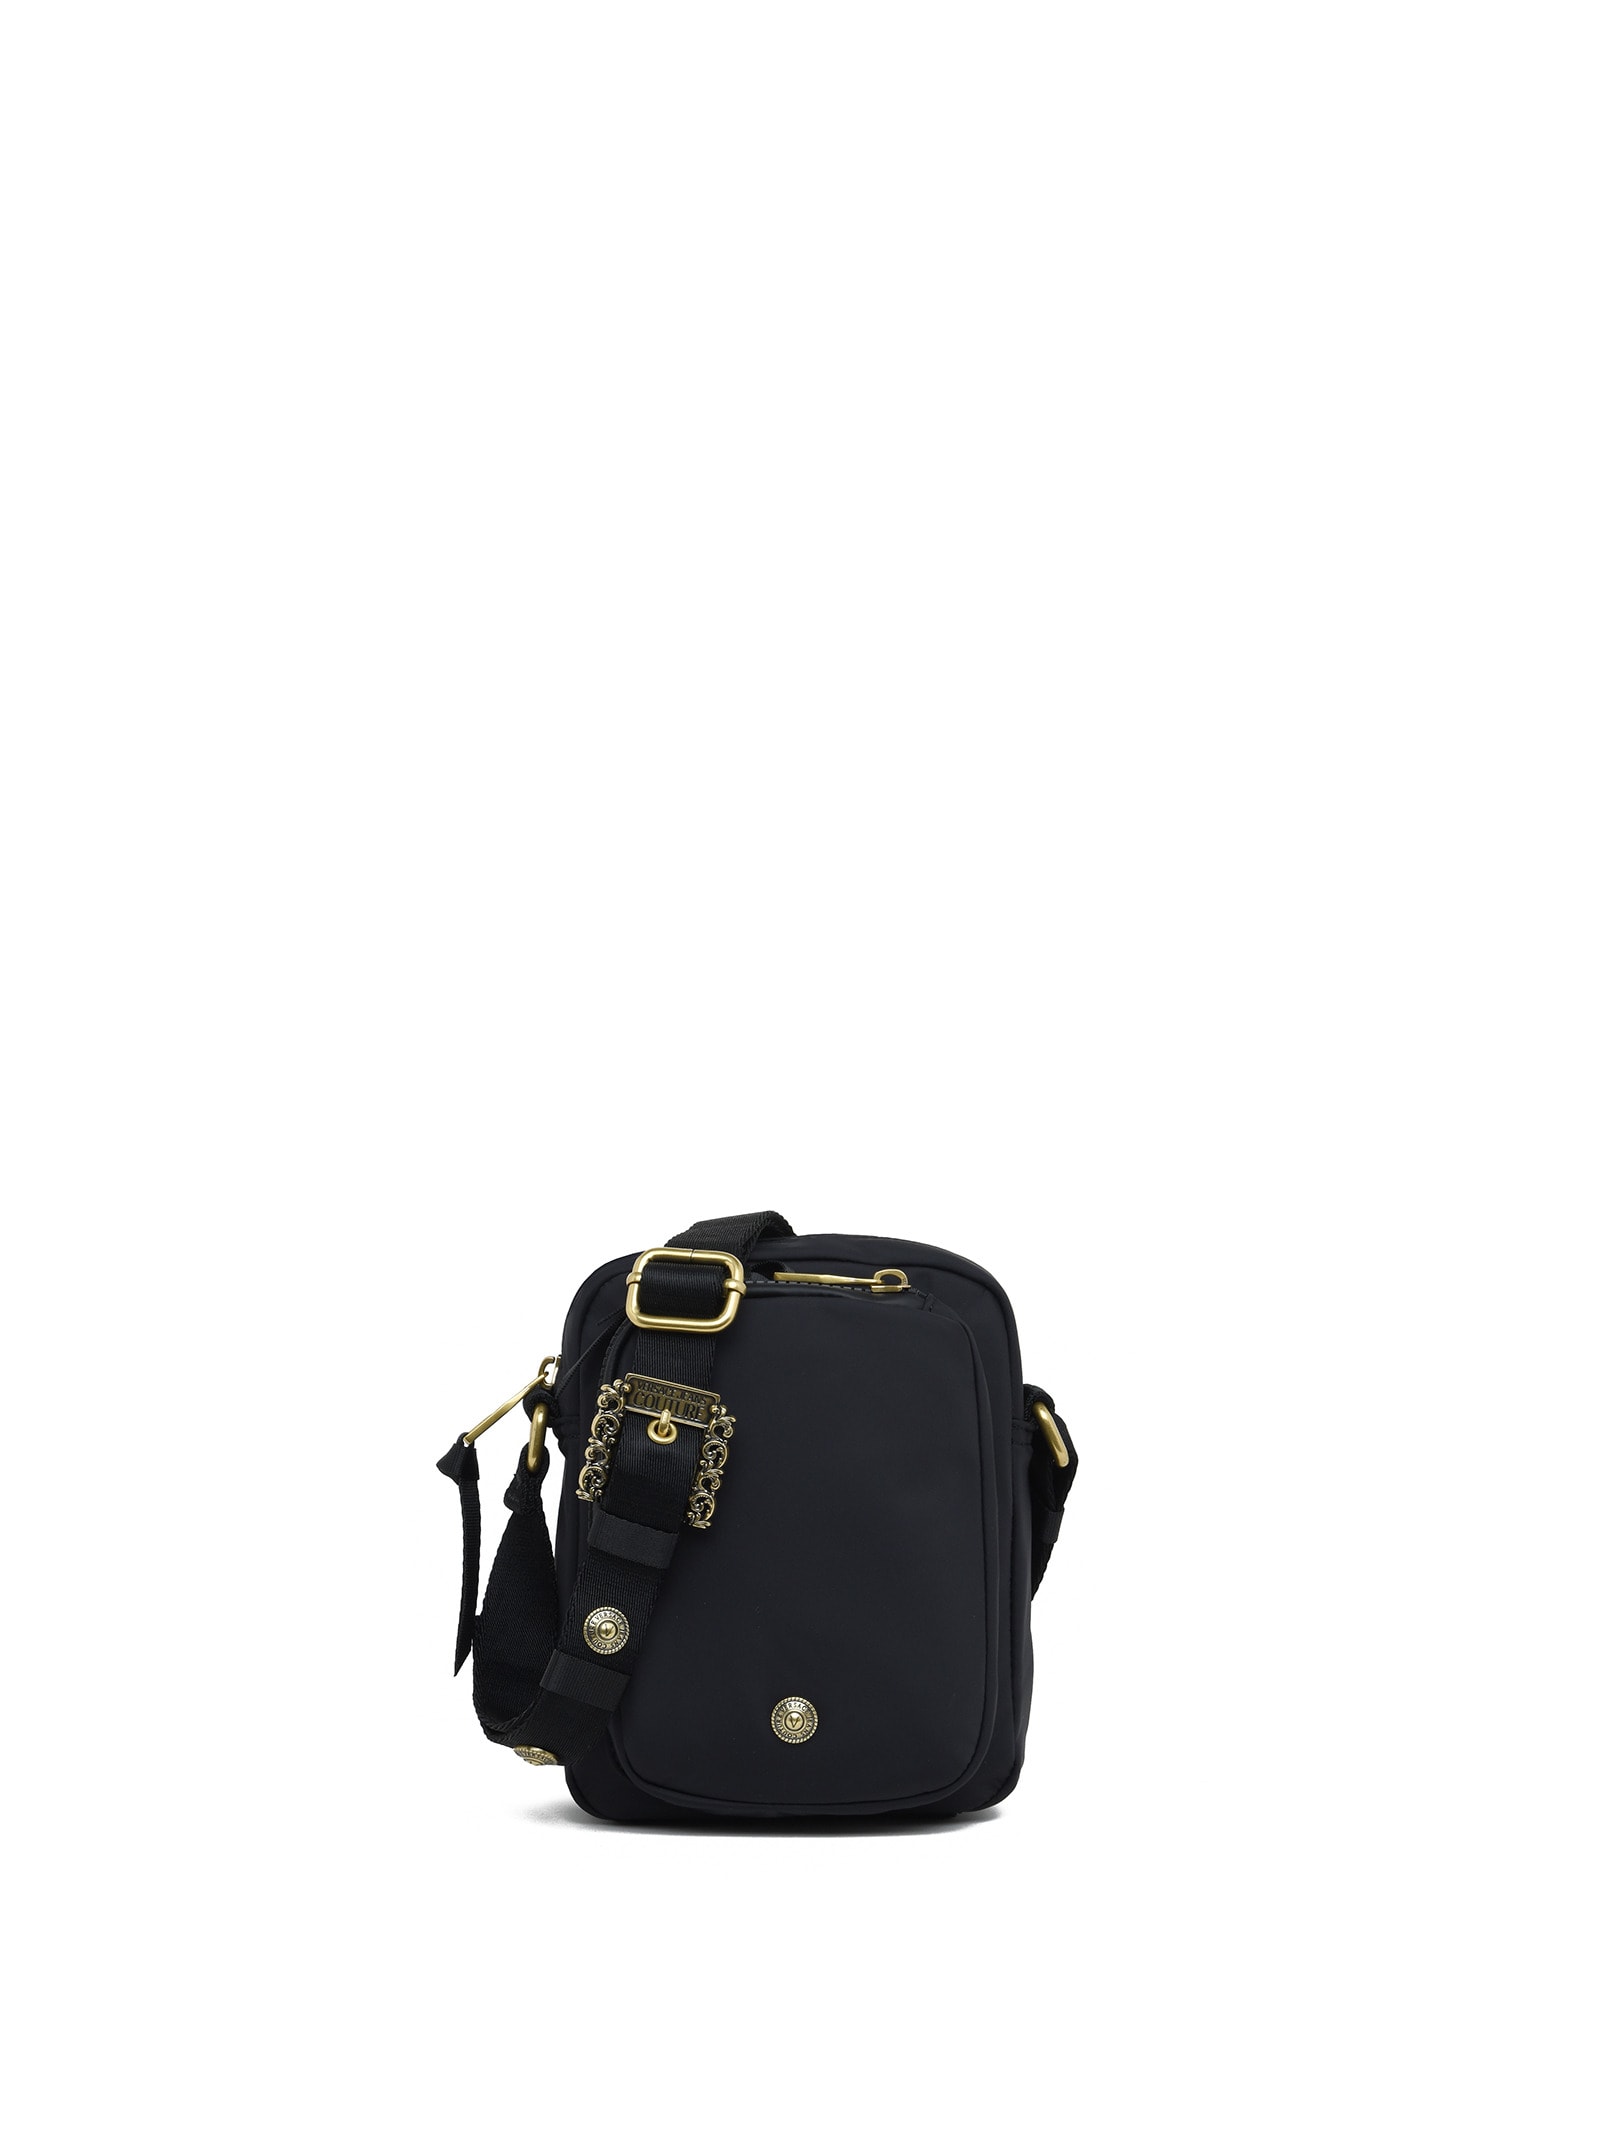 Fabric Crossbody Bag With Buckle Detail